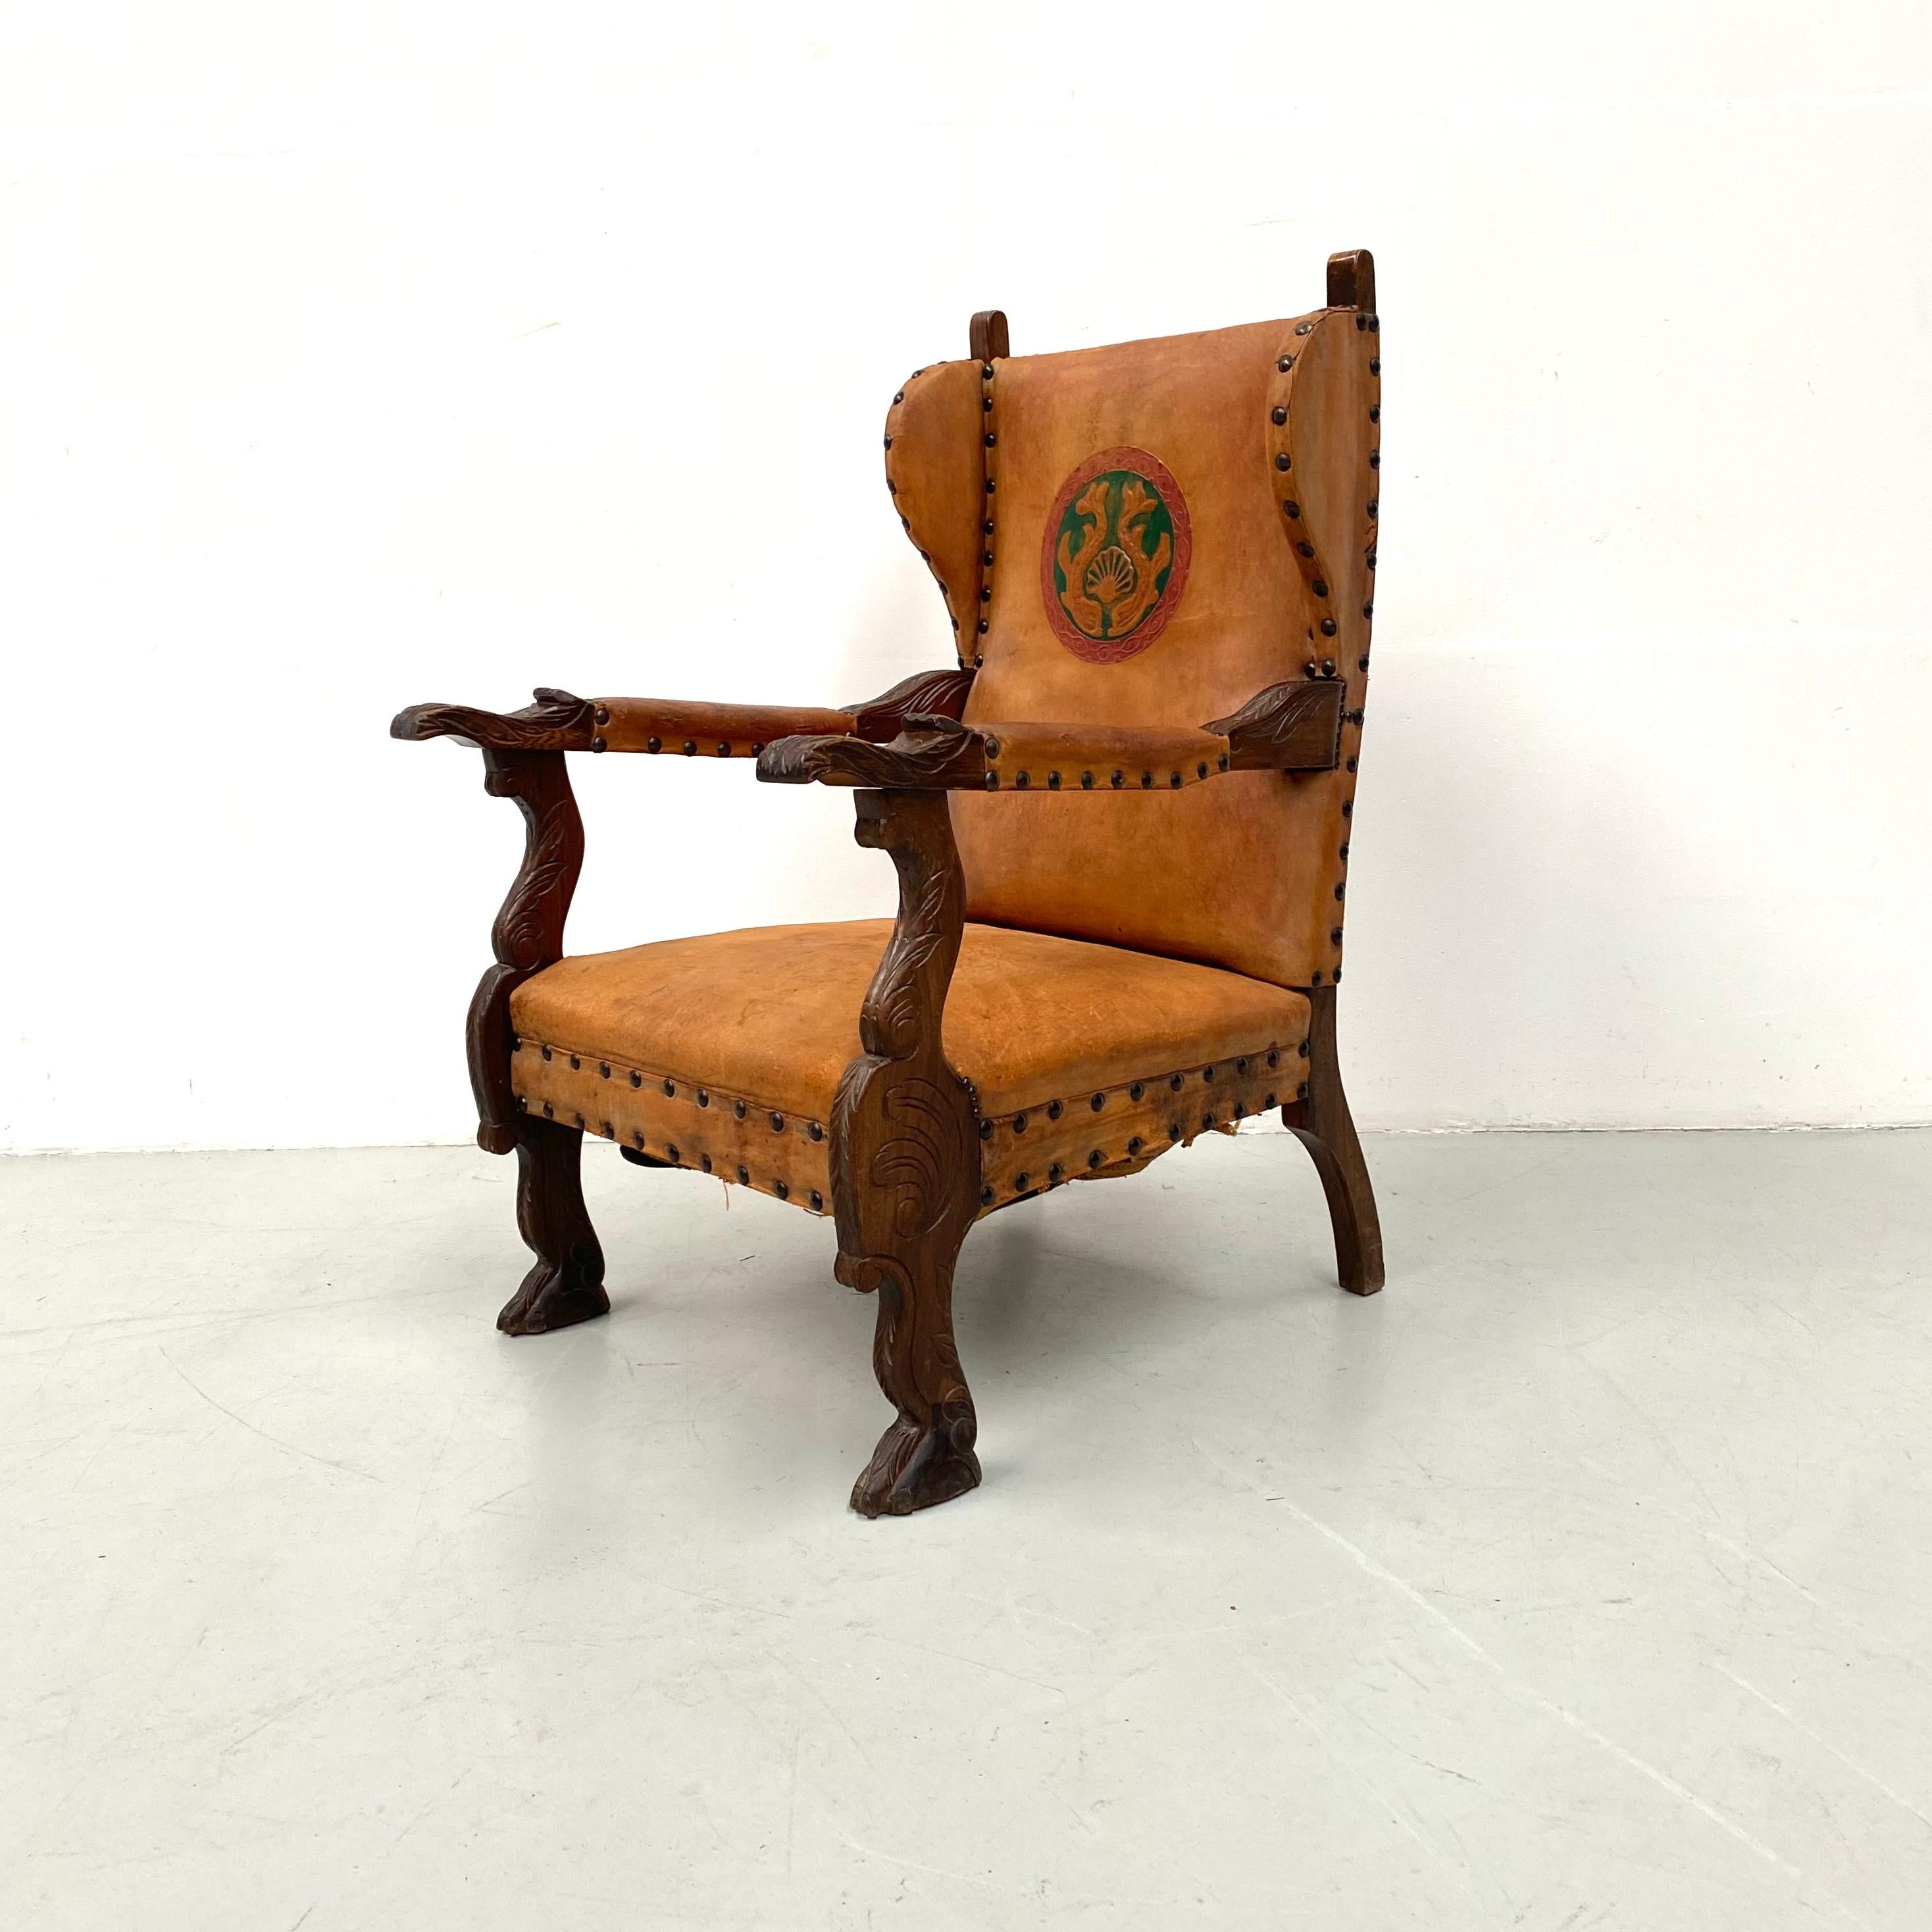 Antique French wingchair in cognac leather with flower and abstract carvings in the oak legs. In the backrest you will find the coat of arms of a noble family from France. Still in good condition. 